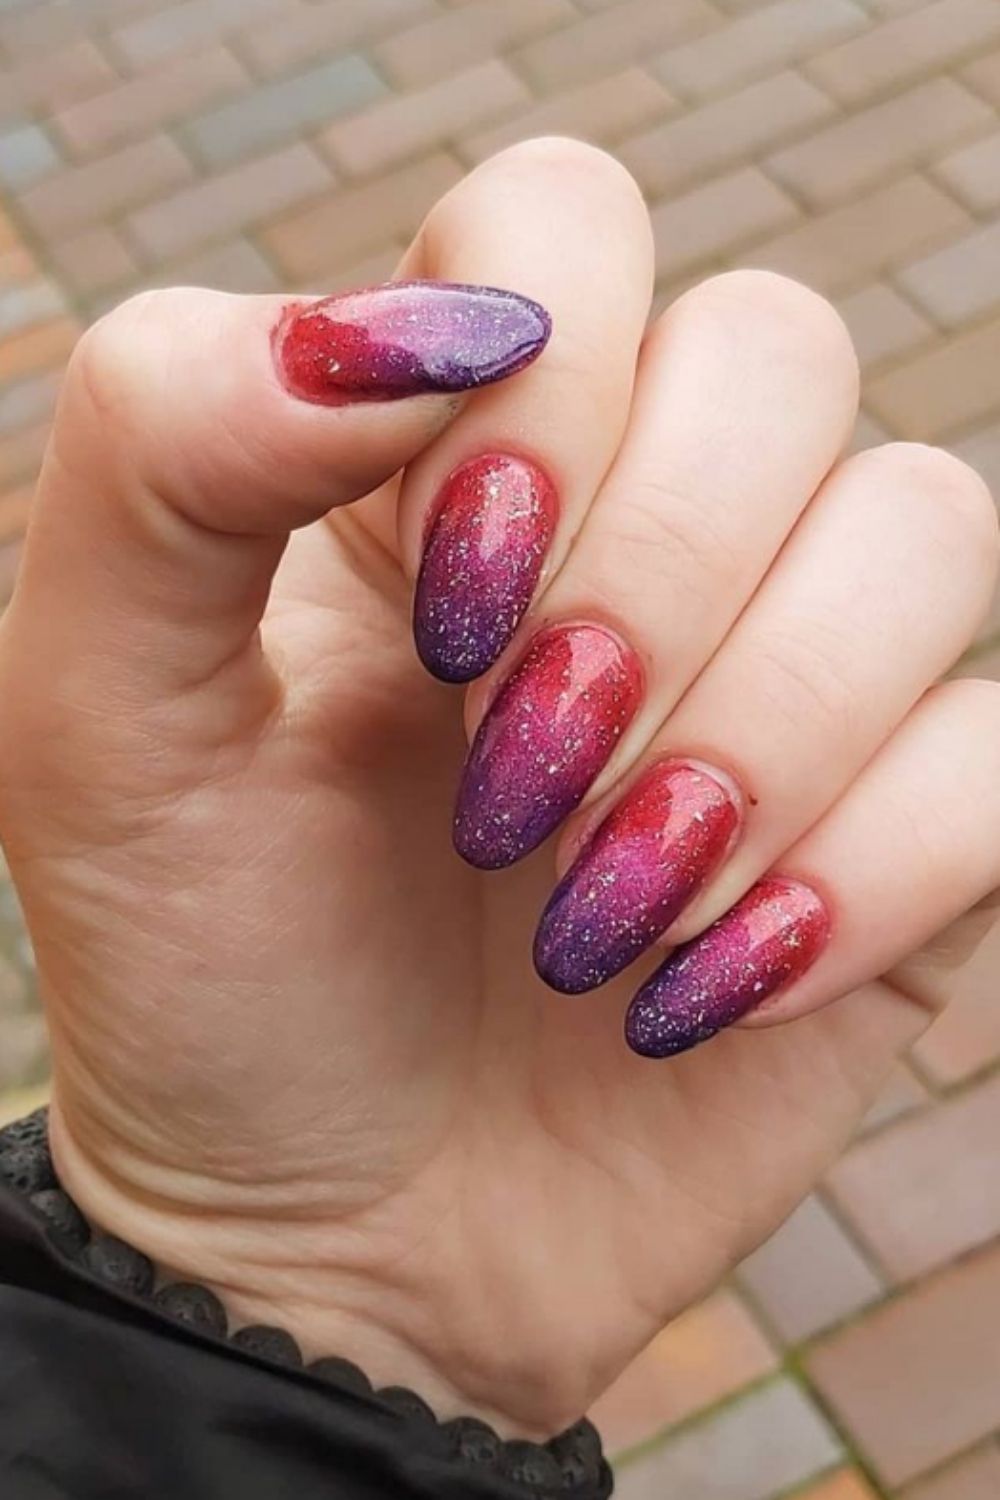 Galaxy nails | The Prettiest Instagram Trend of the Year